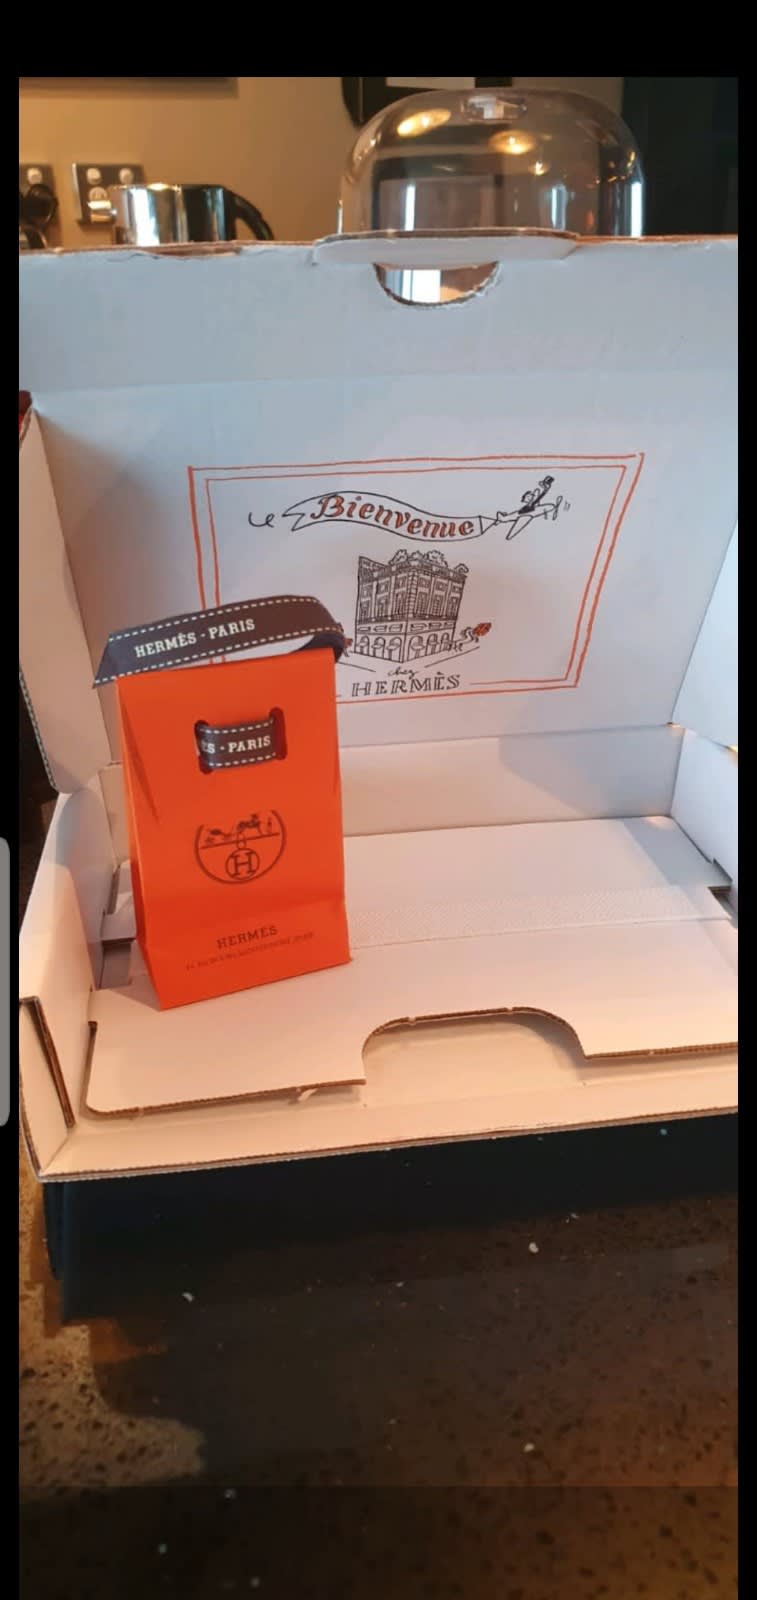 Authentic) Hermes Gift Box and Shopping Bag (Empty), Miscellaneous Goods, Gumtree Australia Queensland - Gold Coast Region